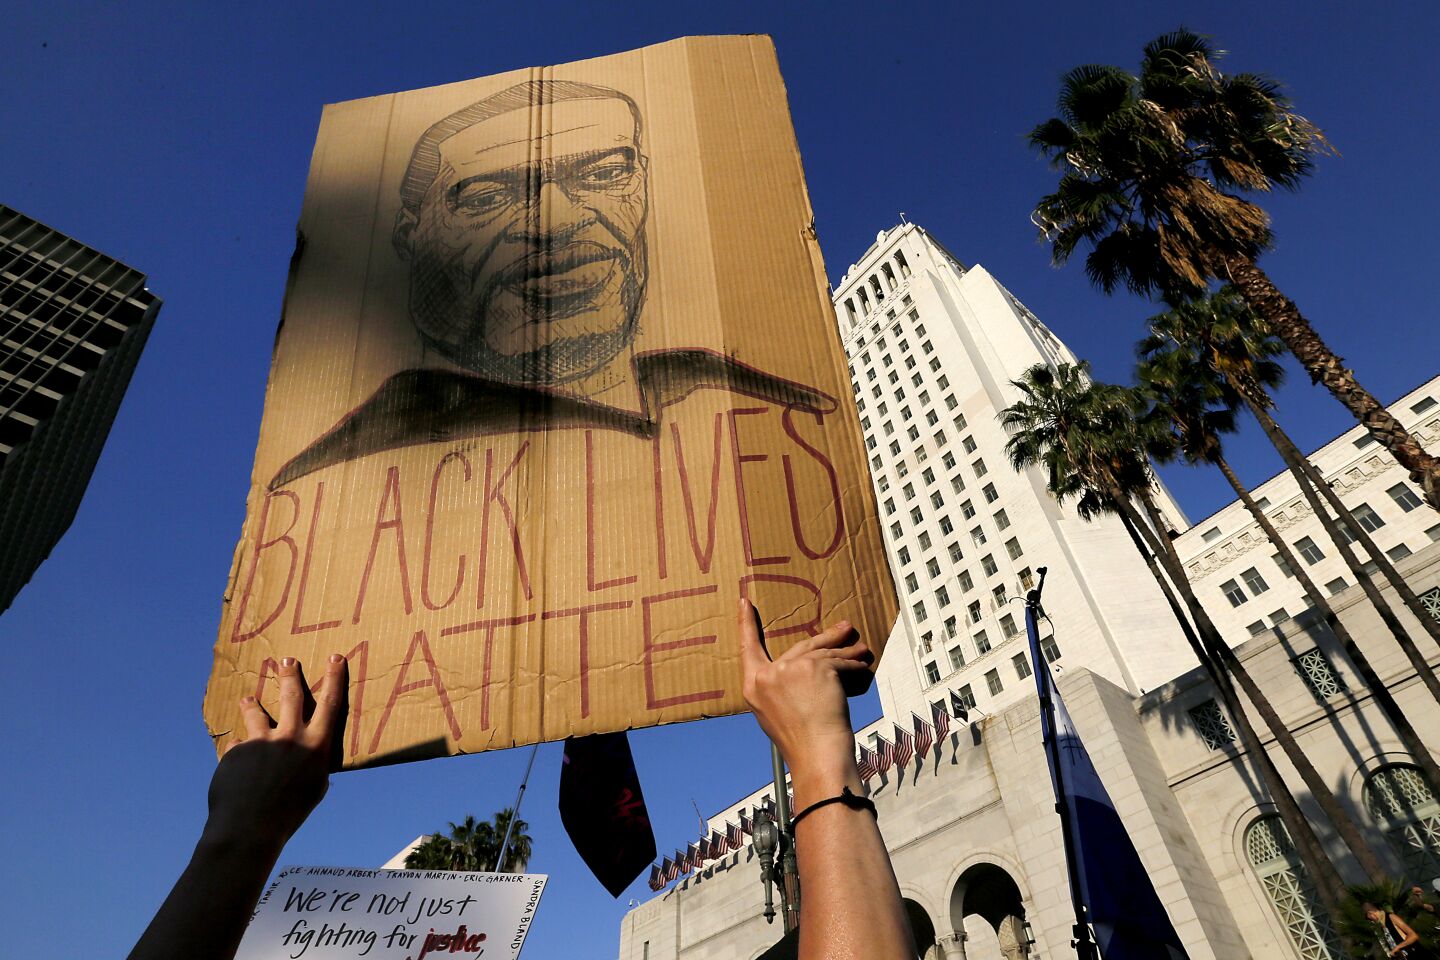 Protesters gather at the Los Angeles Civic Center to demonstrate for justice and against police brutality.